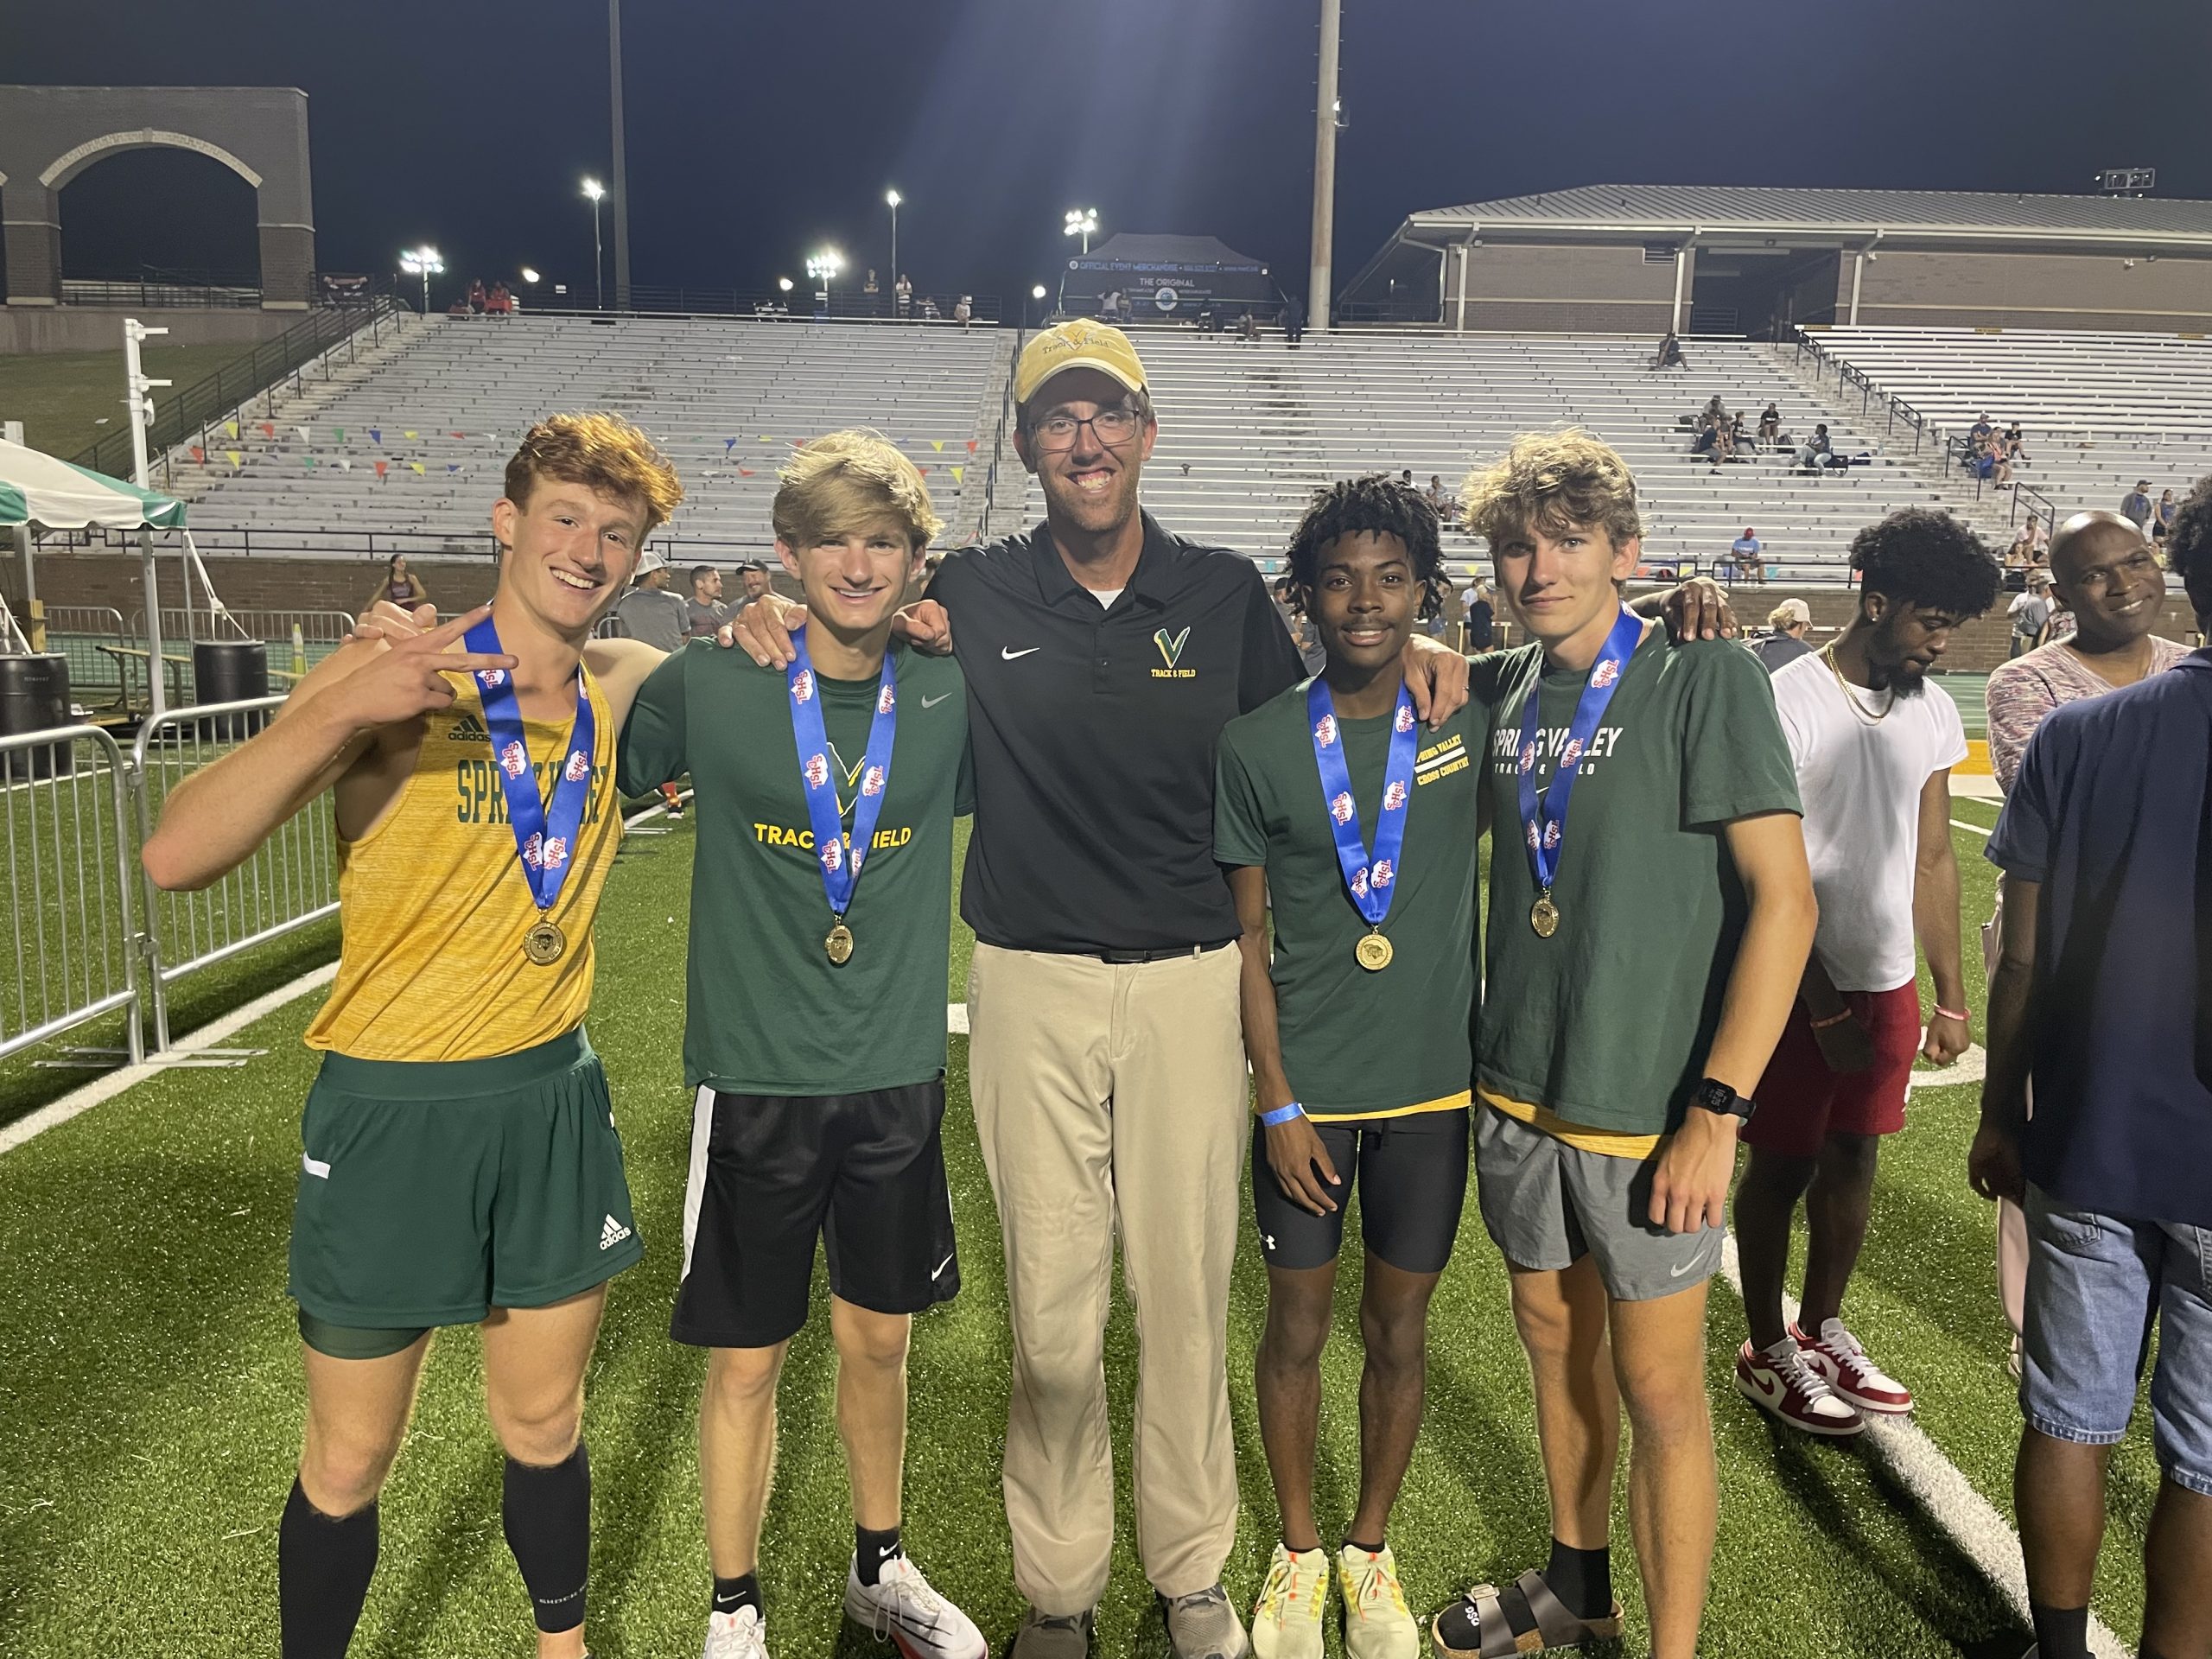 In track and field, Spring Valley boys won the Class 5A overall championship, and Coach Matt Oberly was named state track coach of the year. The 4 x 800m Relay State Championship Team poses with their gold medals: Ethan Taylor, Jack Stacy, Head Coach Matt Oberly, Tyler Shuler, and Jackson Inmon. Photography courtesy of Spring Valley High School